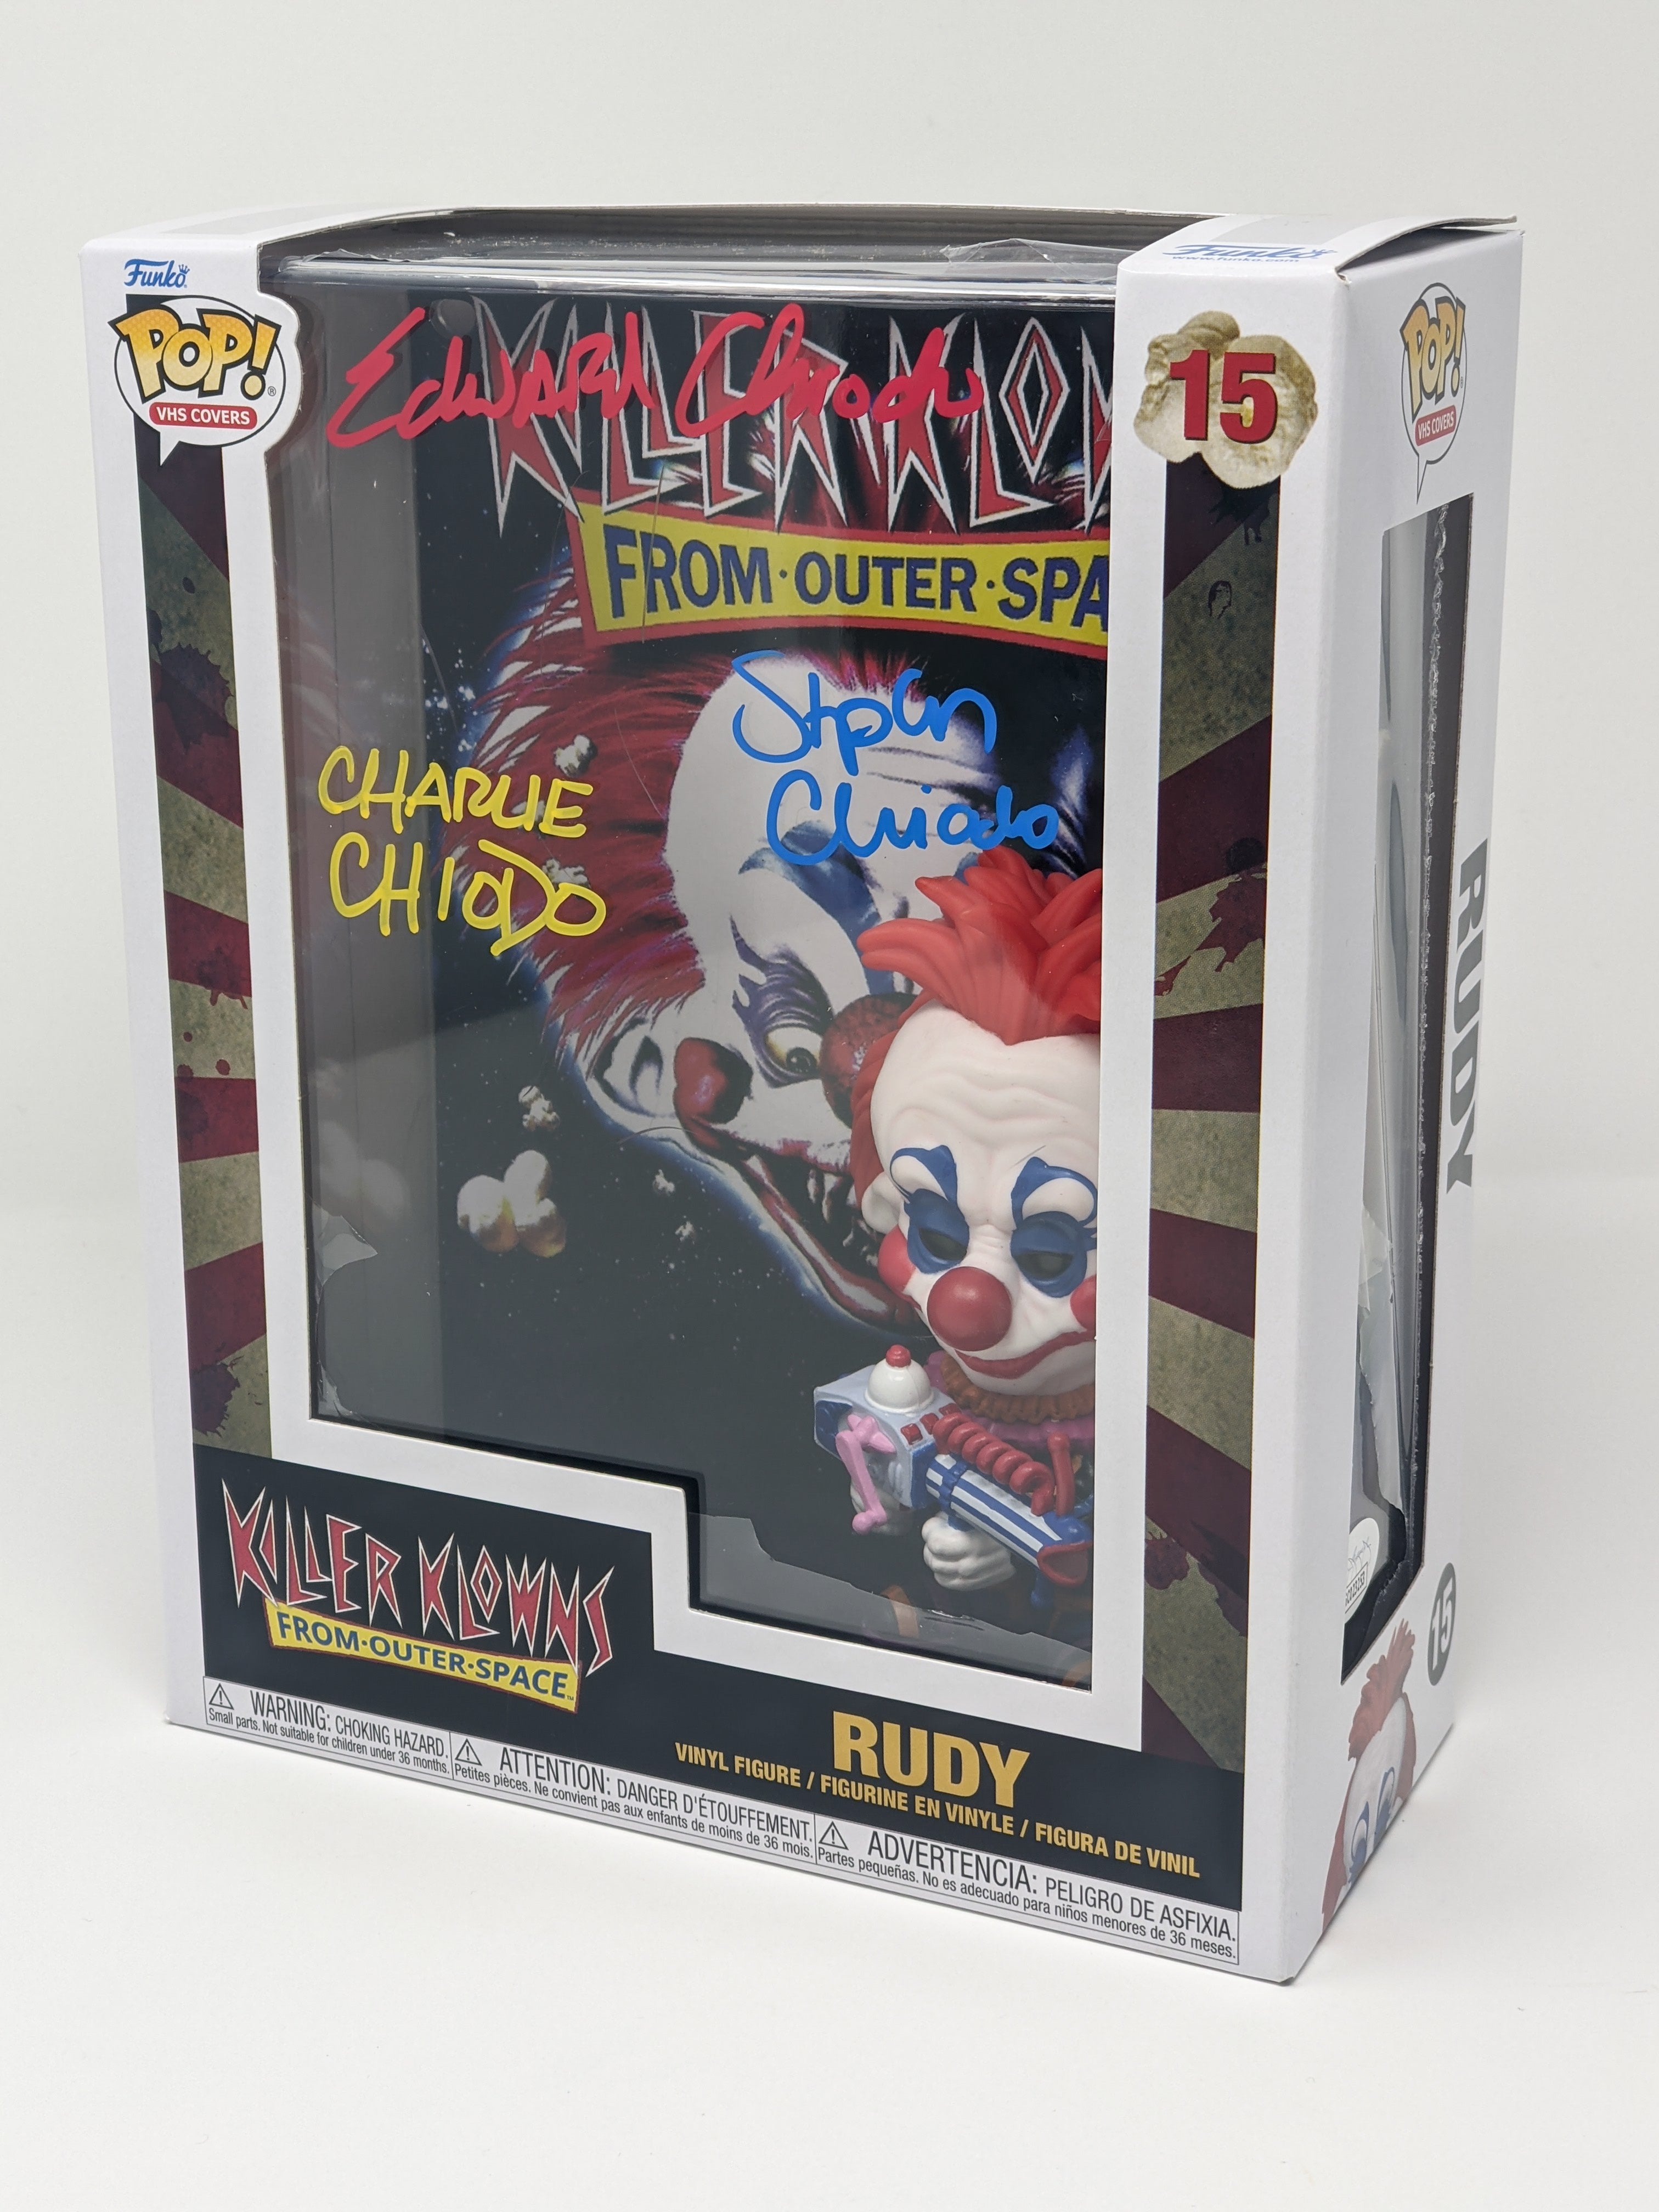 Killer Klowns From Outer Space Rudy #15 Funko Pop! VHS Cover Chiodo Brothers Signed JSA Autograph